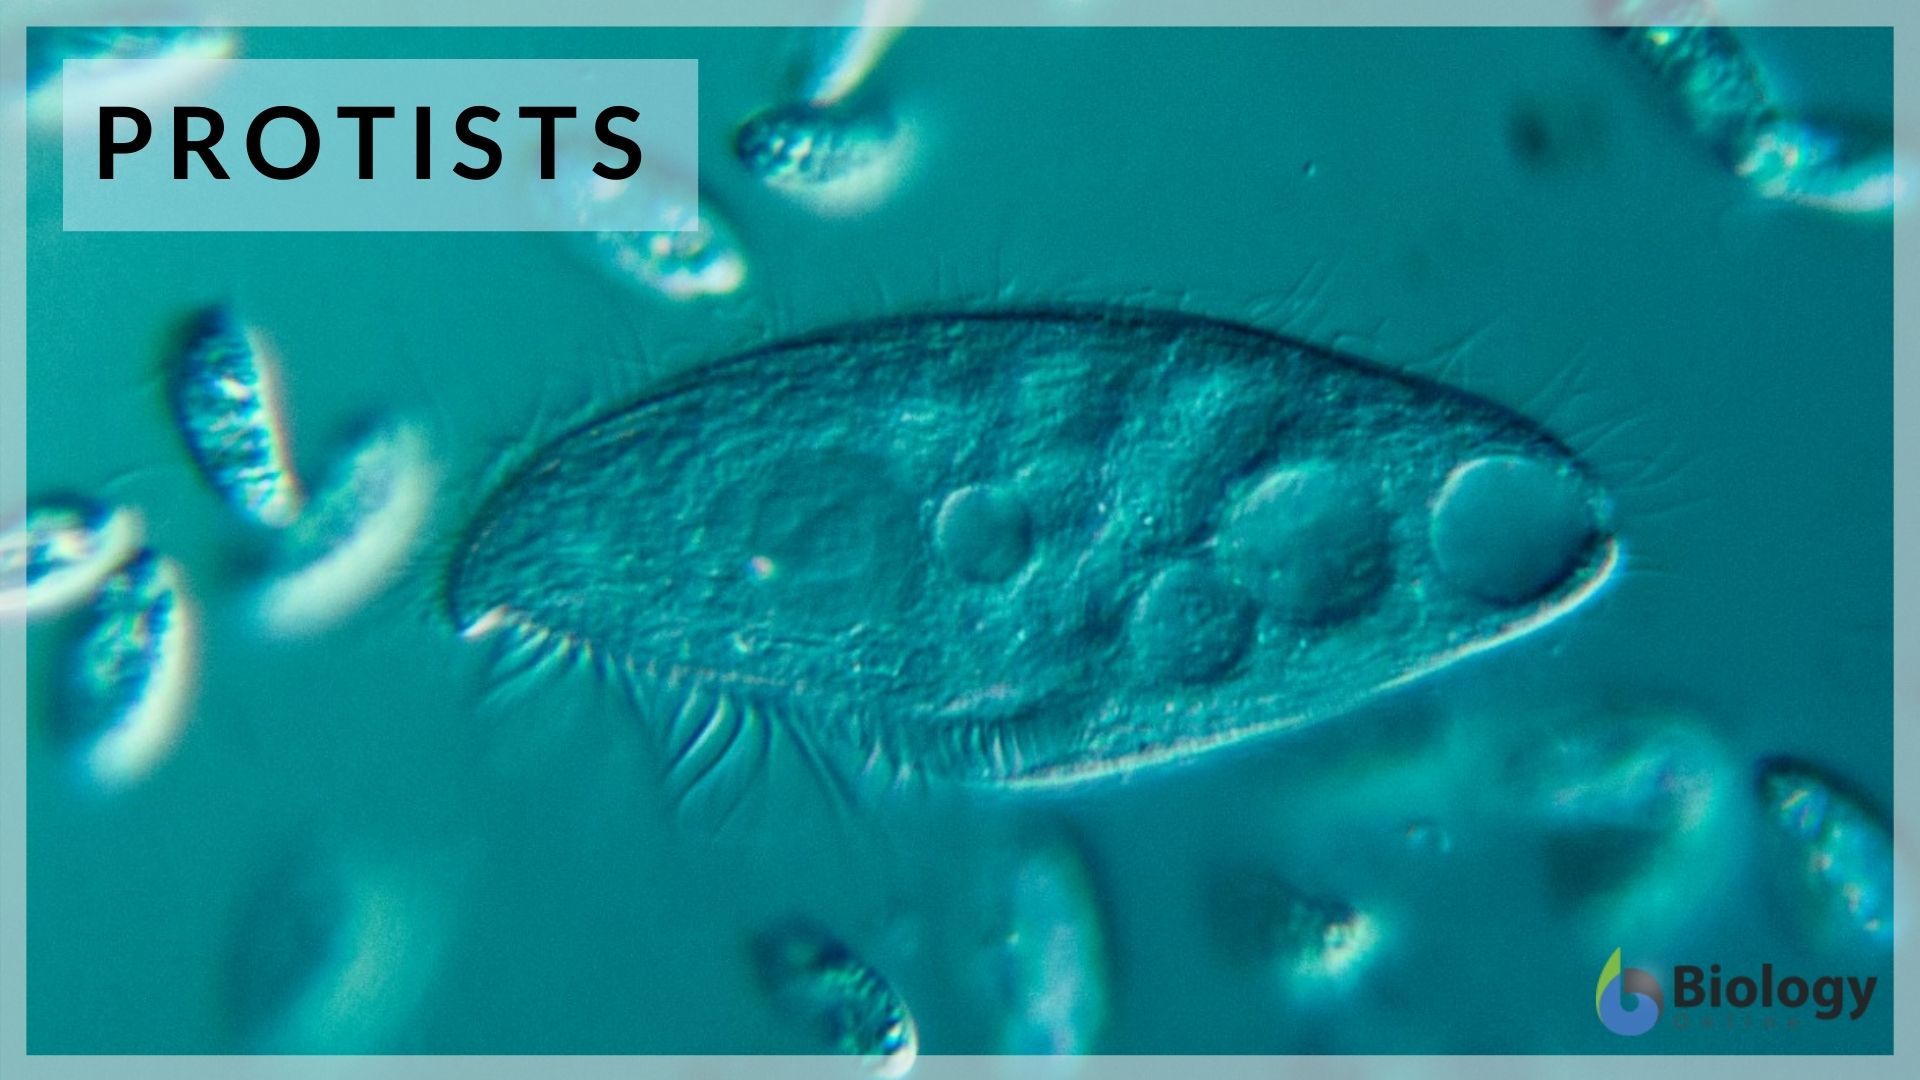 Protist Definition and Examples - Biology Online Dictionary